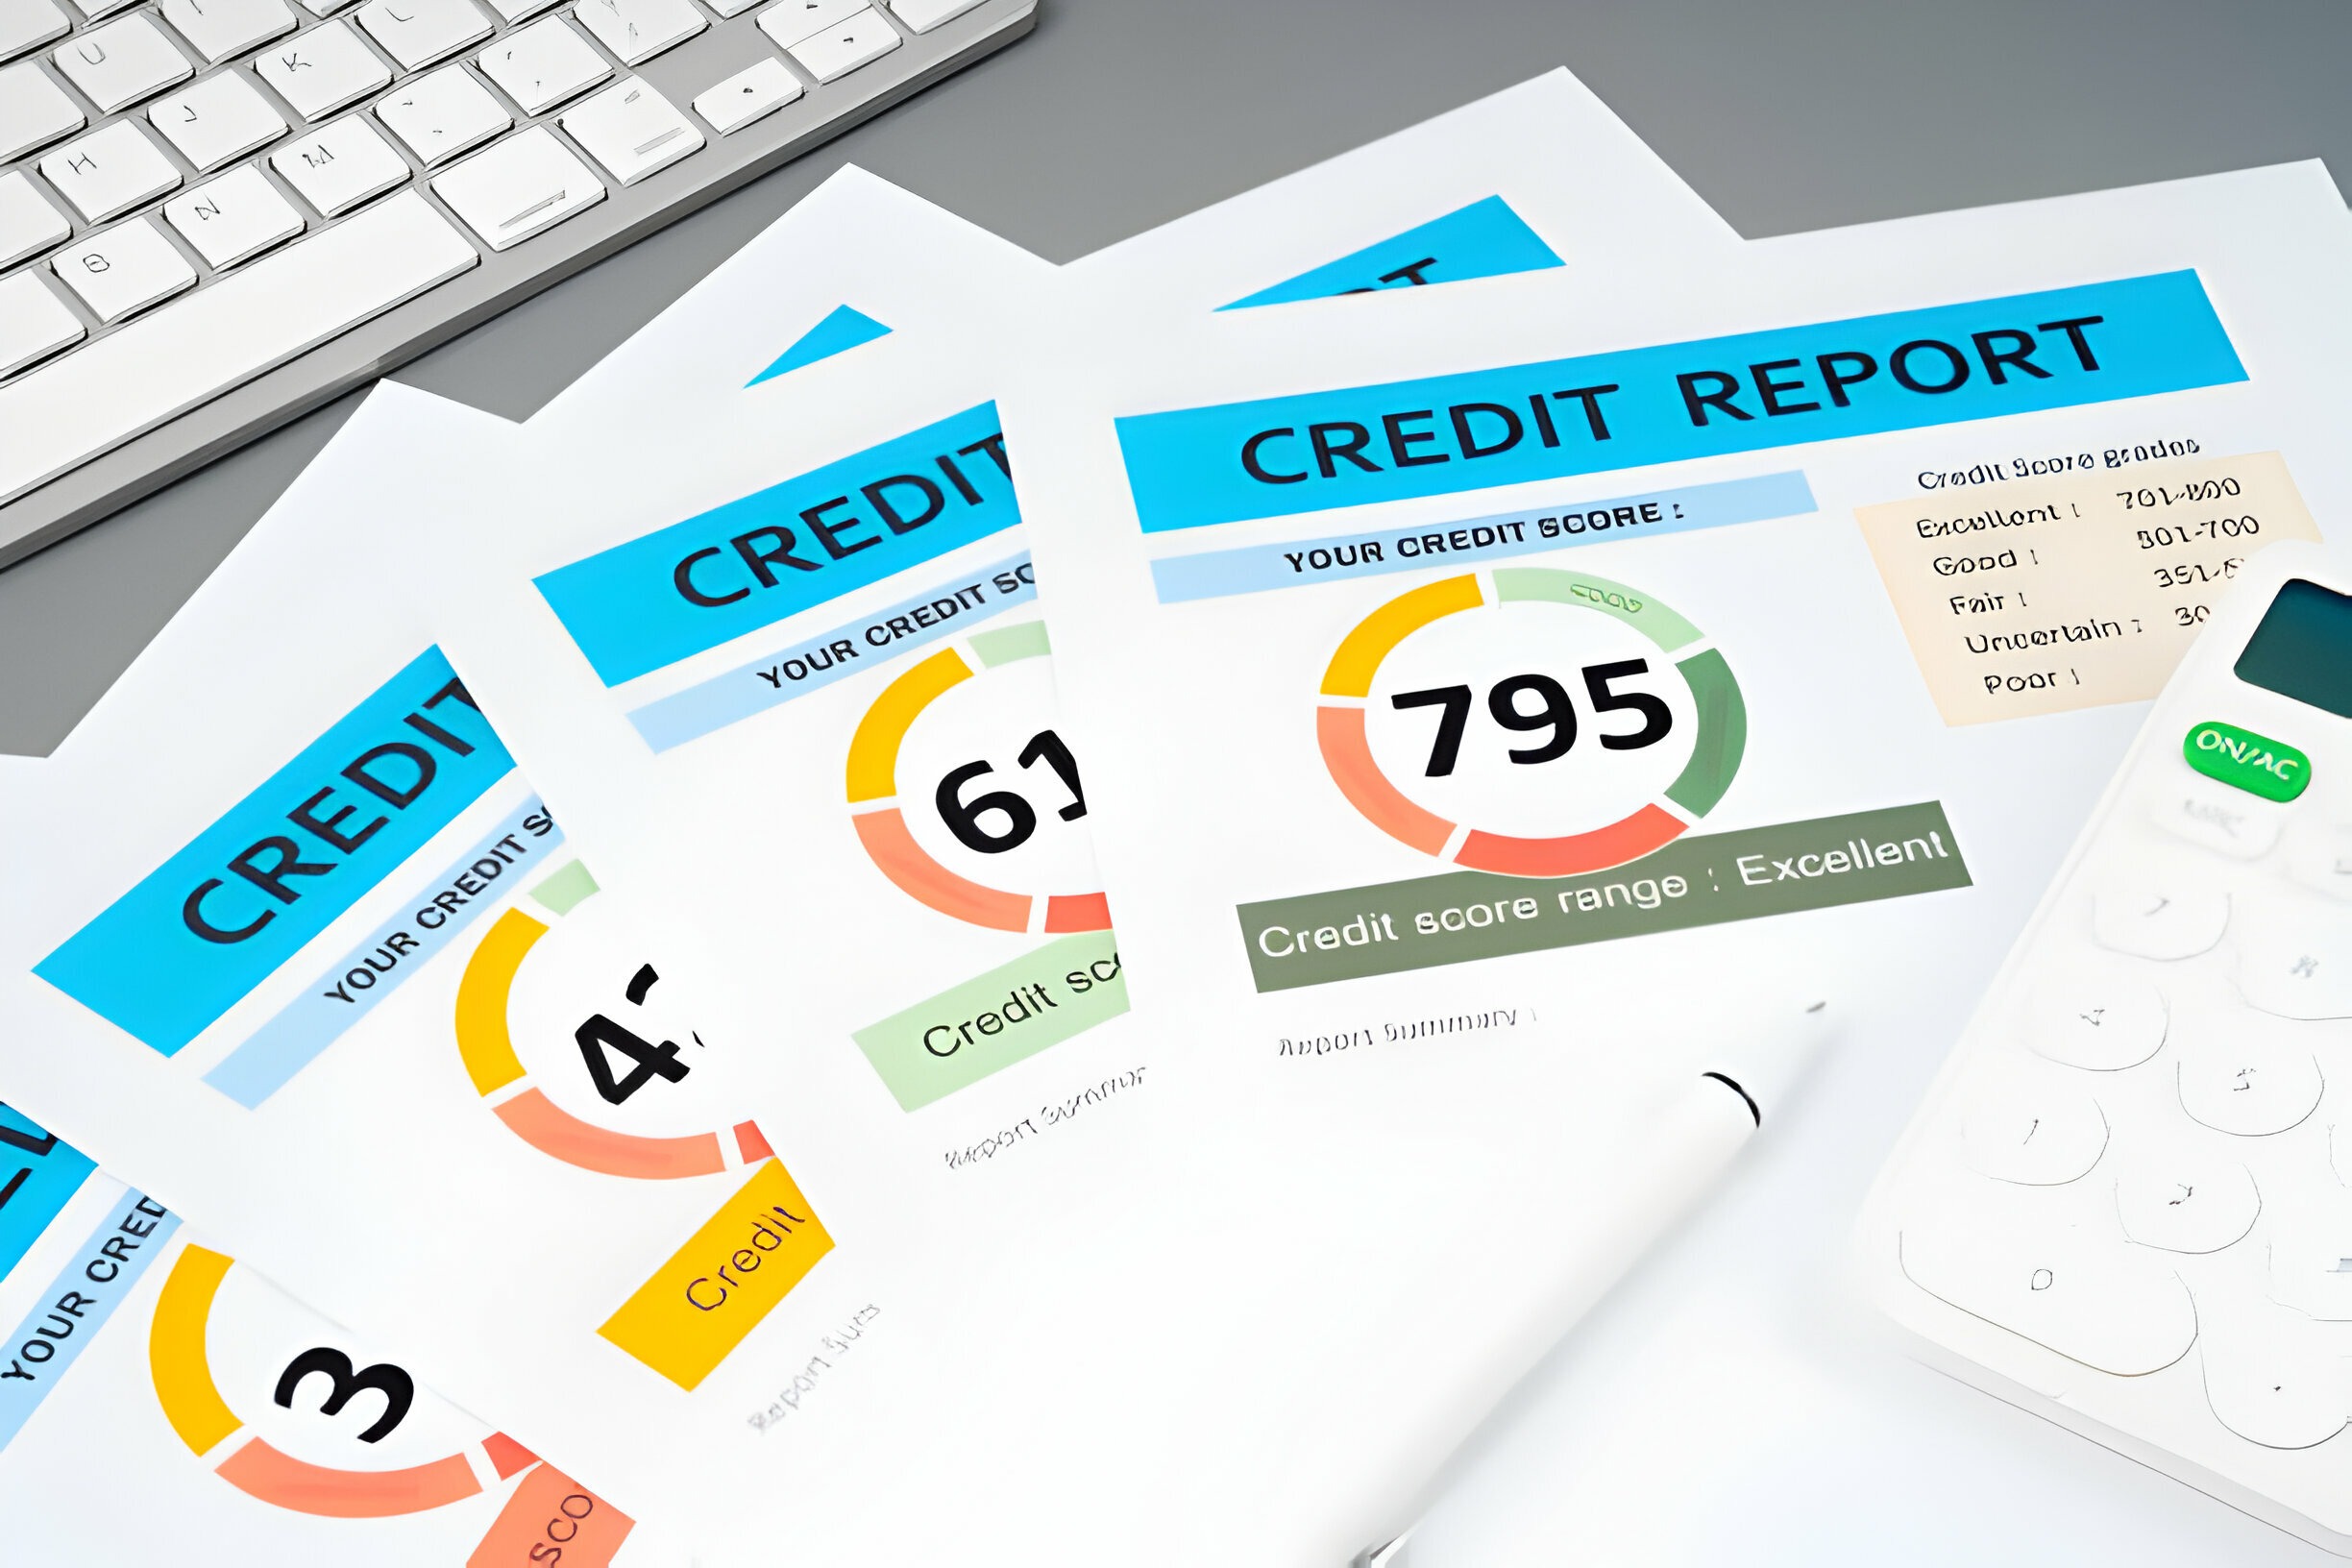 Tips for cleaning up your credit report before applying for a new loan